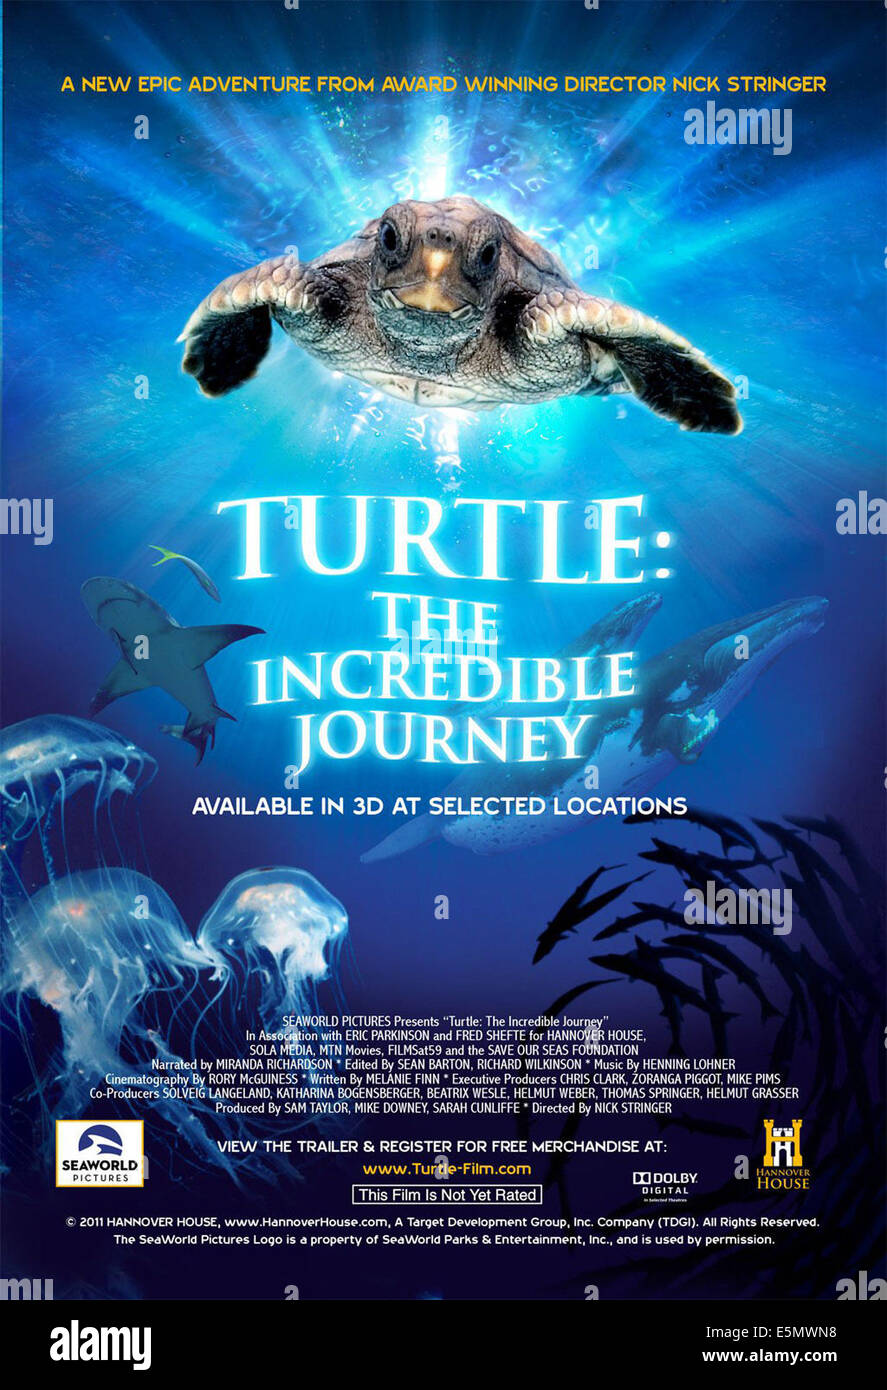 TURTLE: THE INCREDIBLE JOURNEY, US poster, 2009, ©Hannover House/courtesy Everett Collection Stock Photo